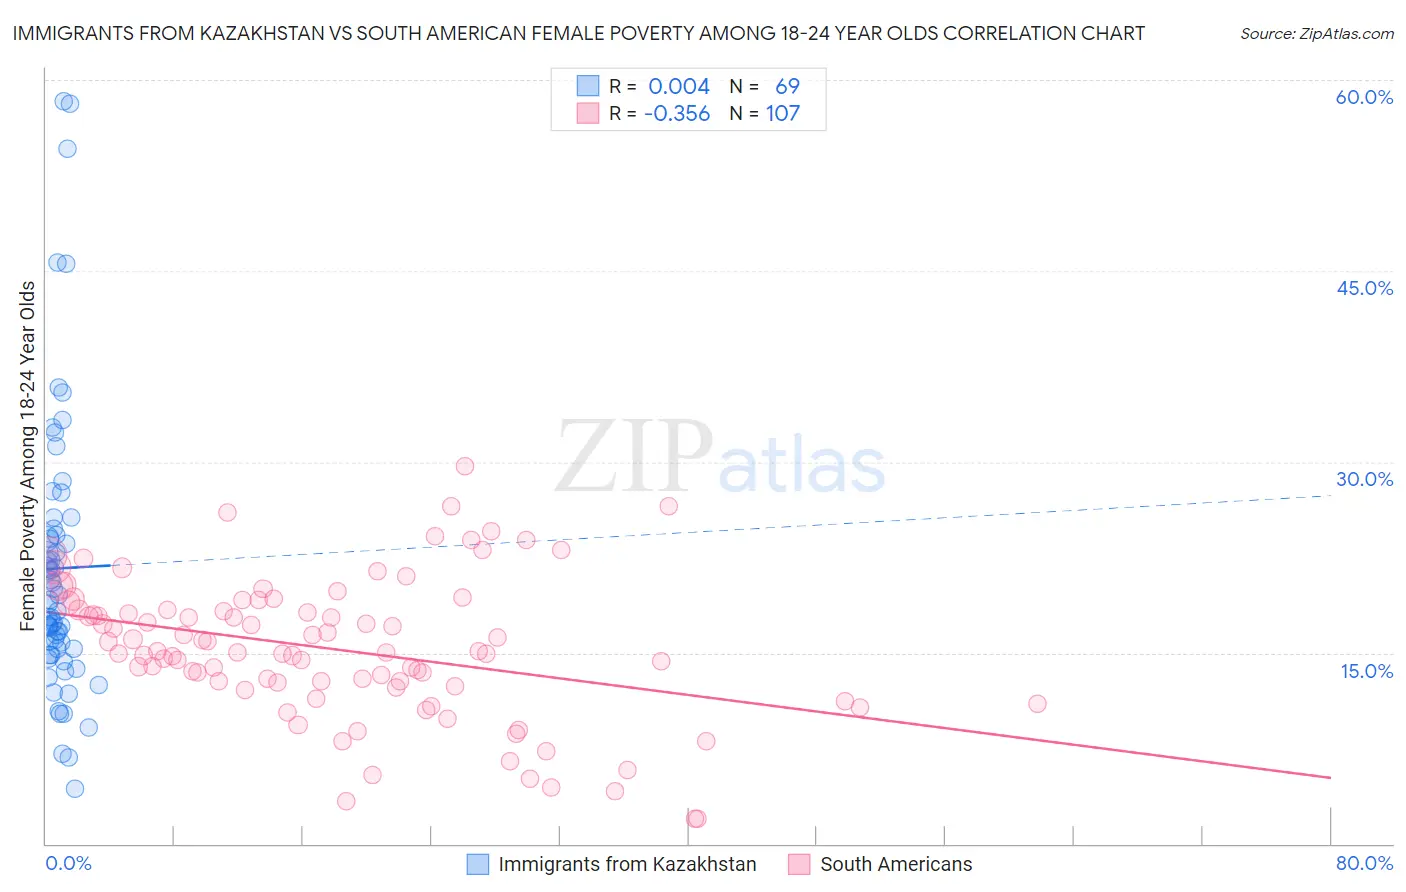 Immigrants from Kazakhstan vs South American Female Poverty Among 18-24 Year Olds